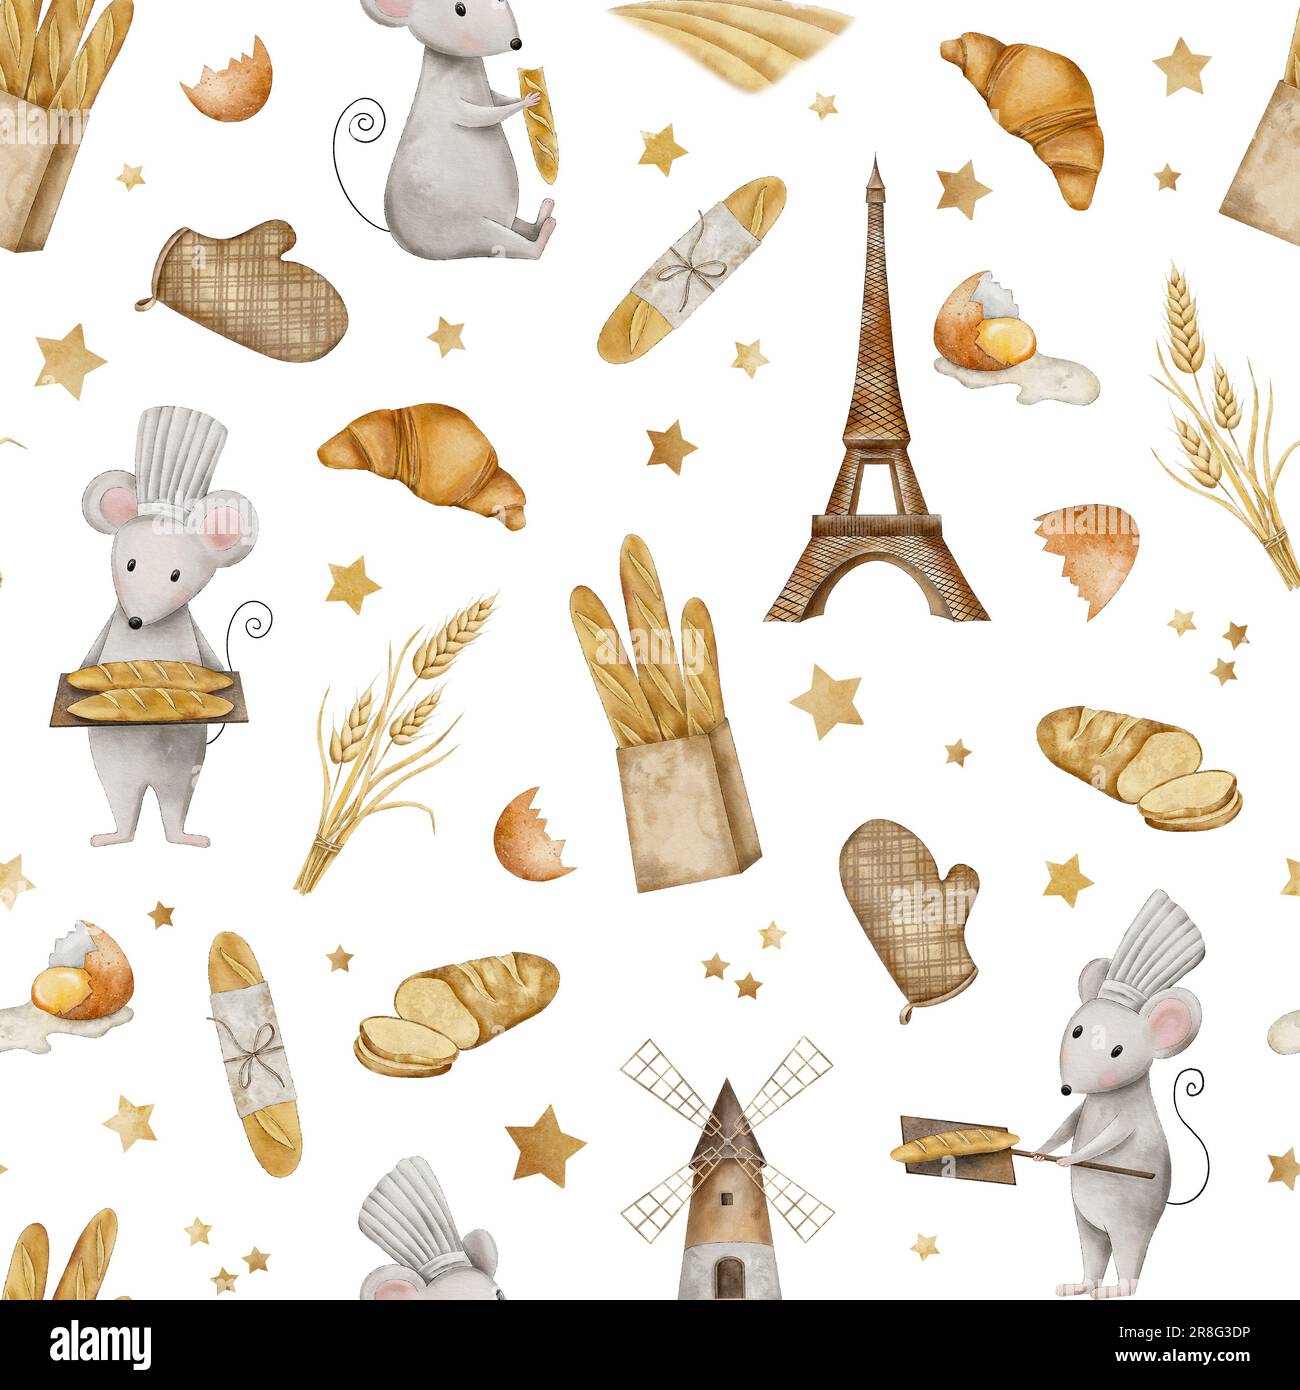 Seamless pattern with mouse chef, eggs, flour sack, croissant, Crispy French baguettes in craft bag with bunch of spikelets of wheat, rye, grains and Stock Photo